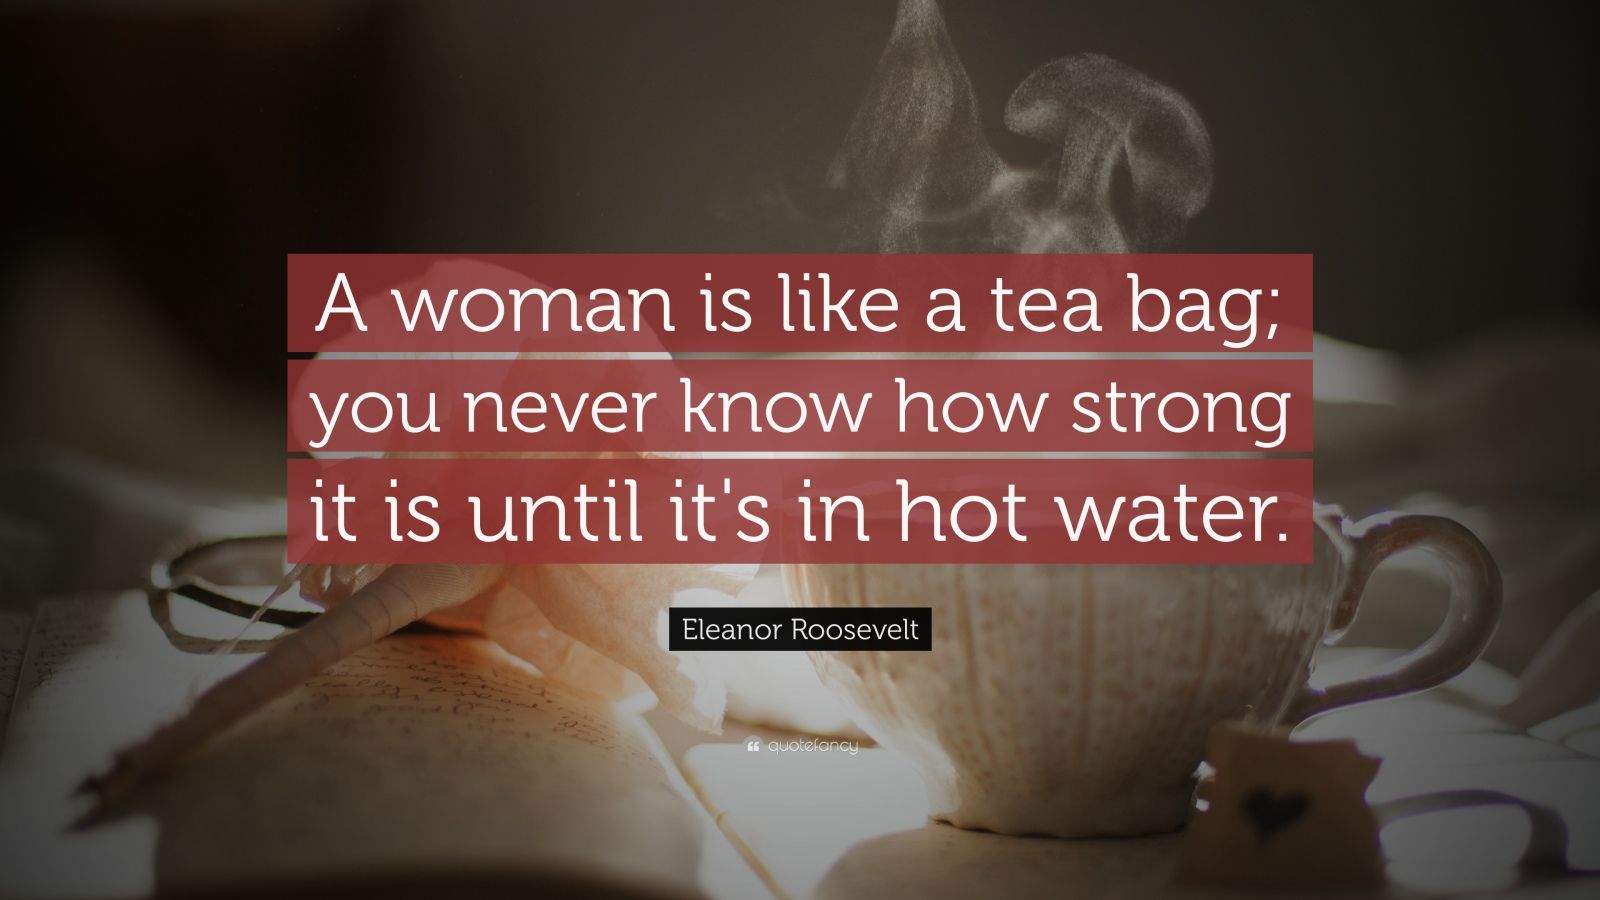 Eleanor Roosevelt Quote: “A woman is like a tea bag; you never know how